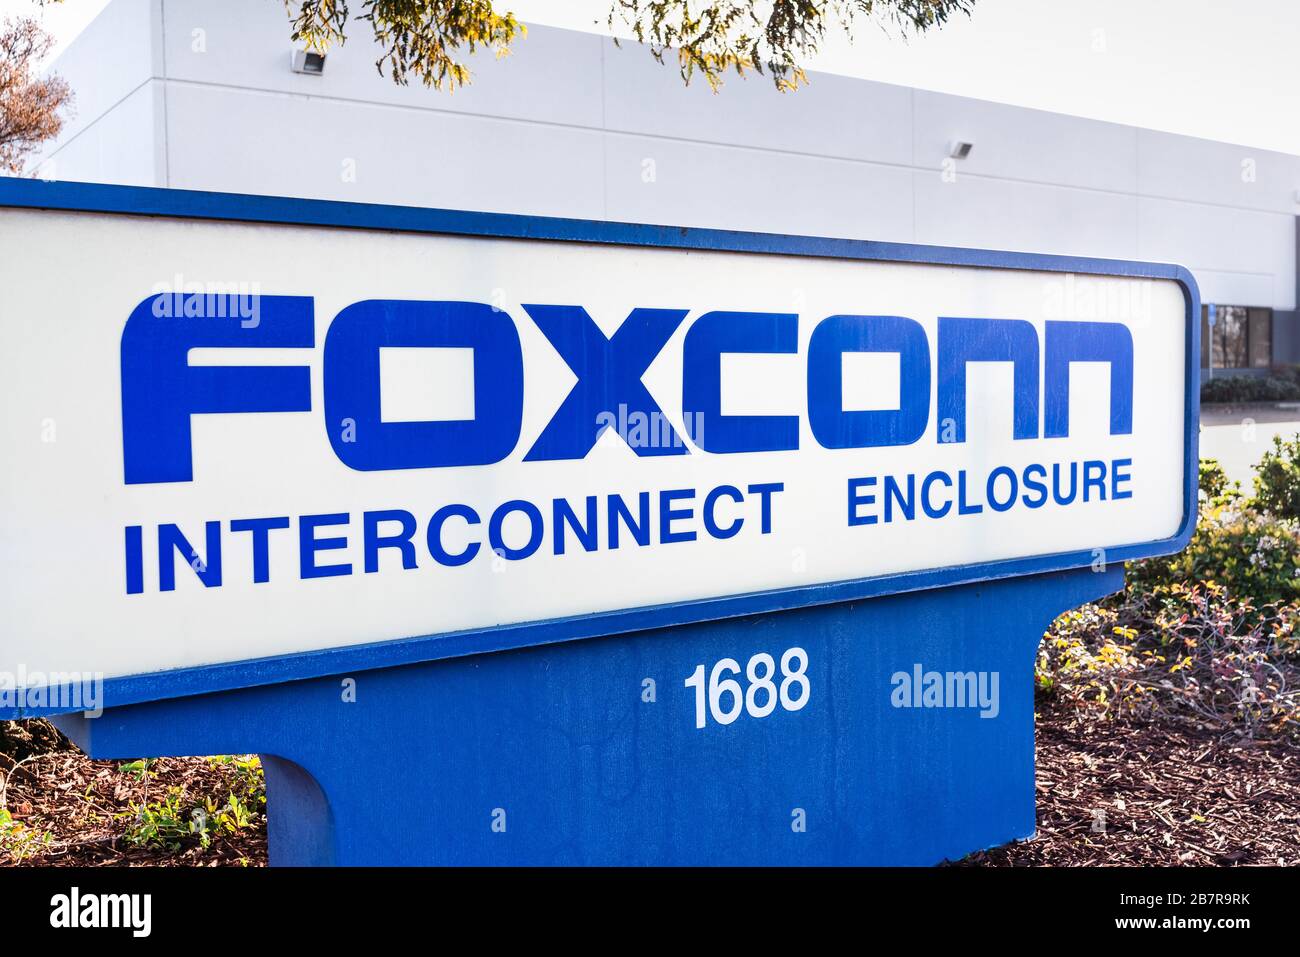 Mar 13, 2020 Santa Clara / CA / USA - Foxconn offices in Silicon Valley; Hon Hai Precision Industry Co., Ltd., trading as Foxconn Technology Group, is Stock Photo